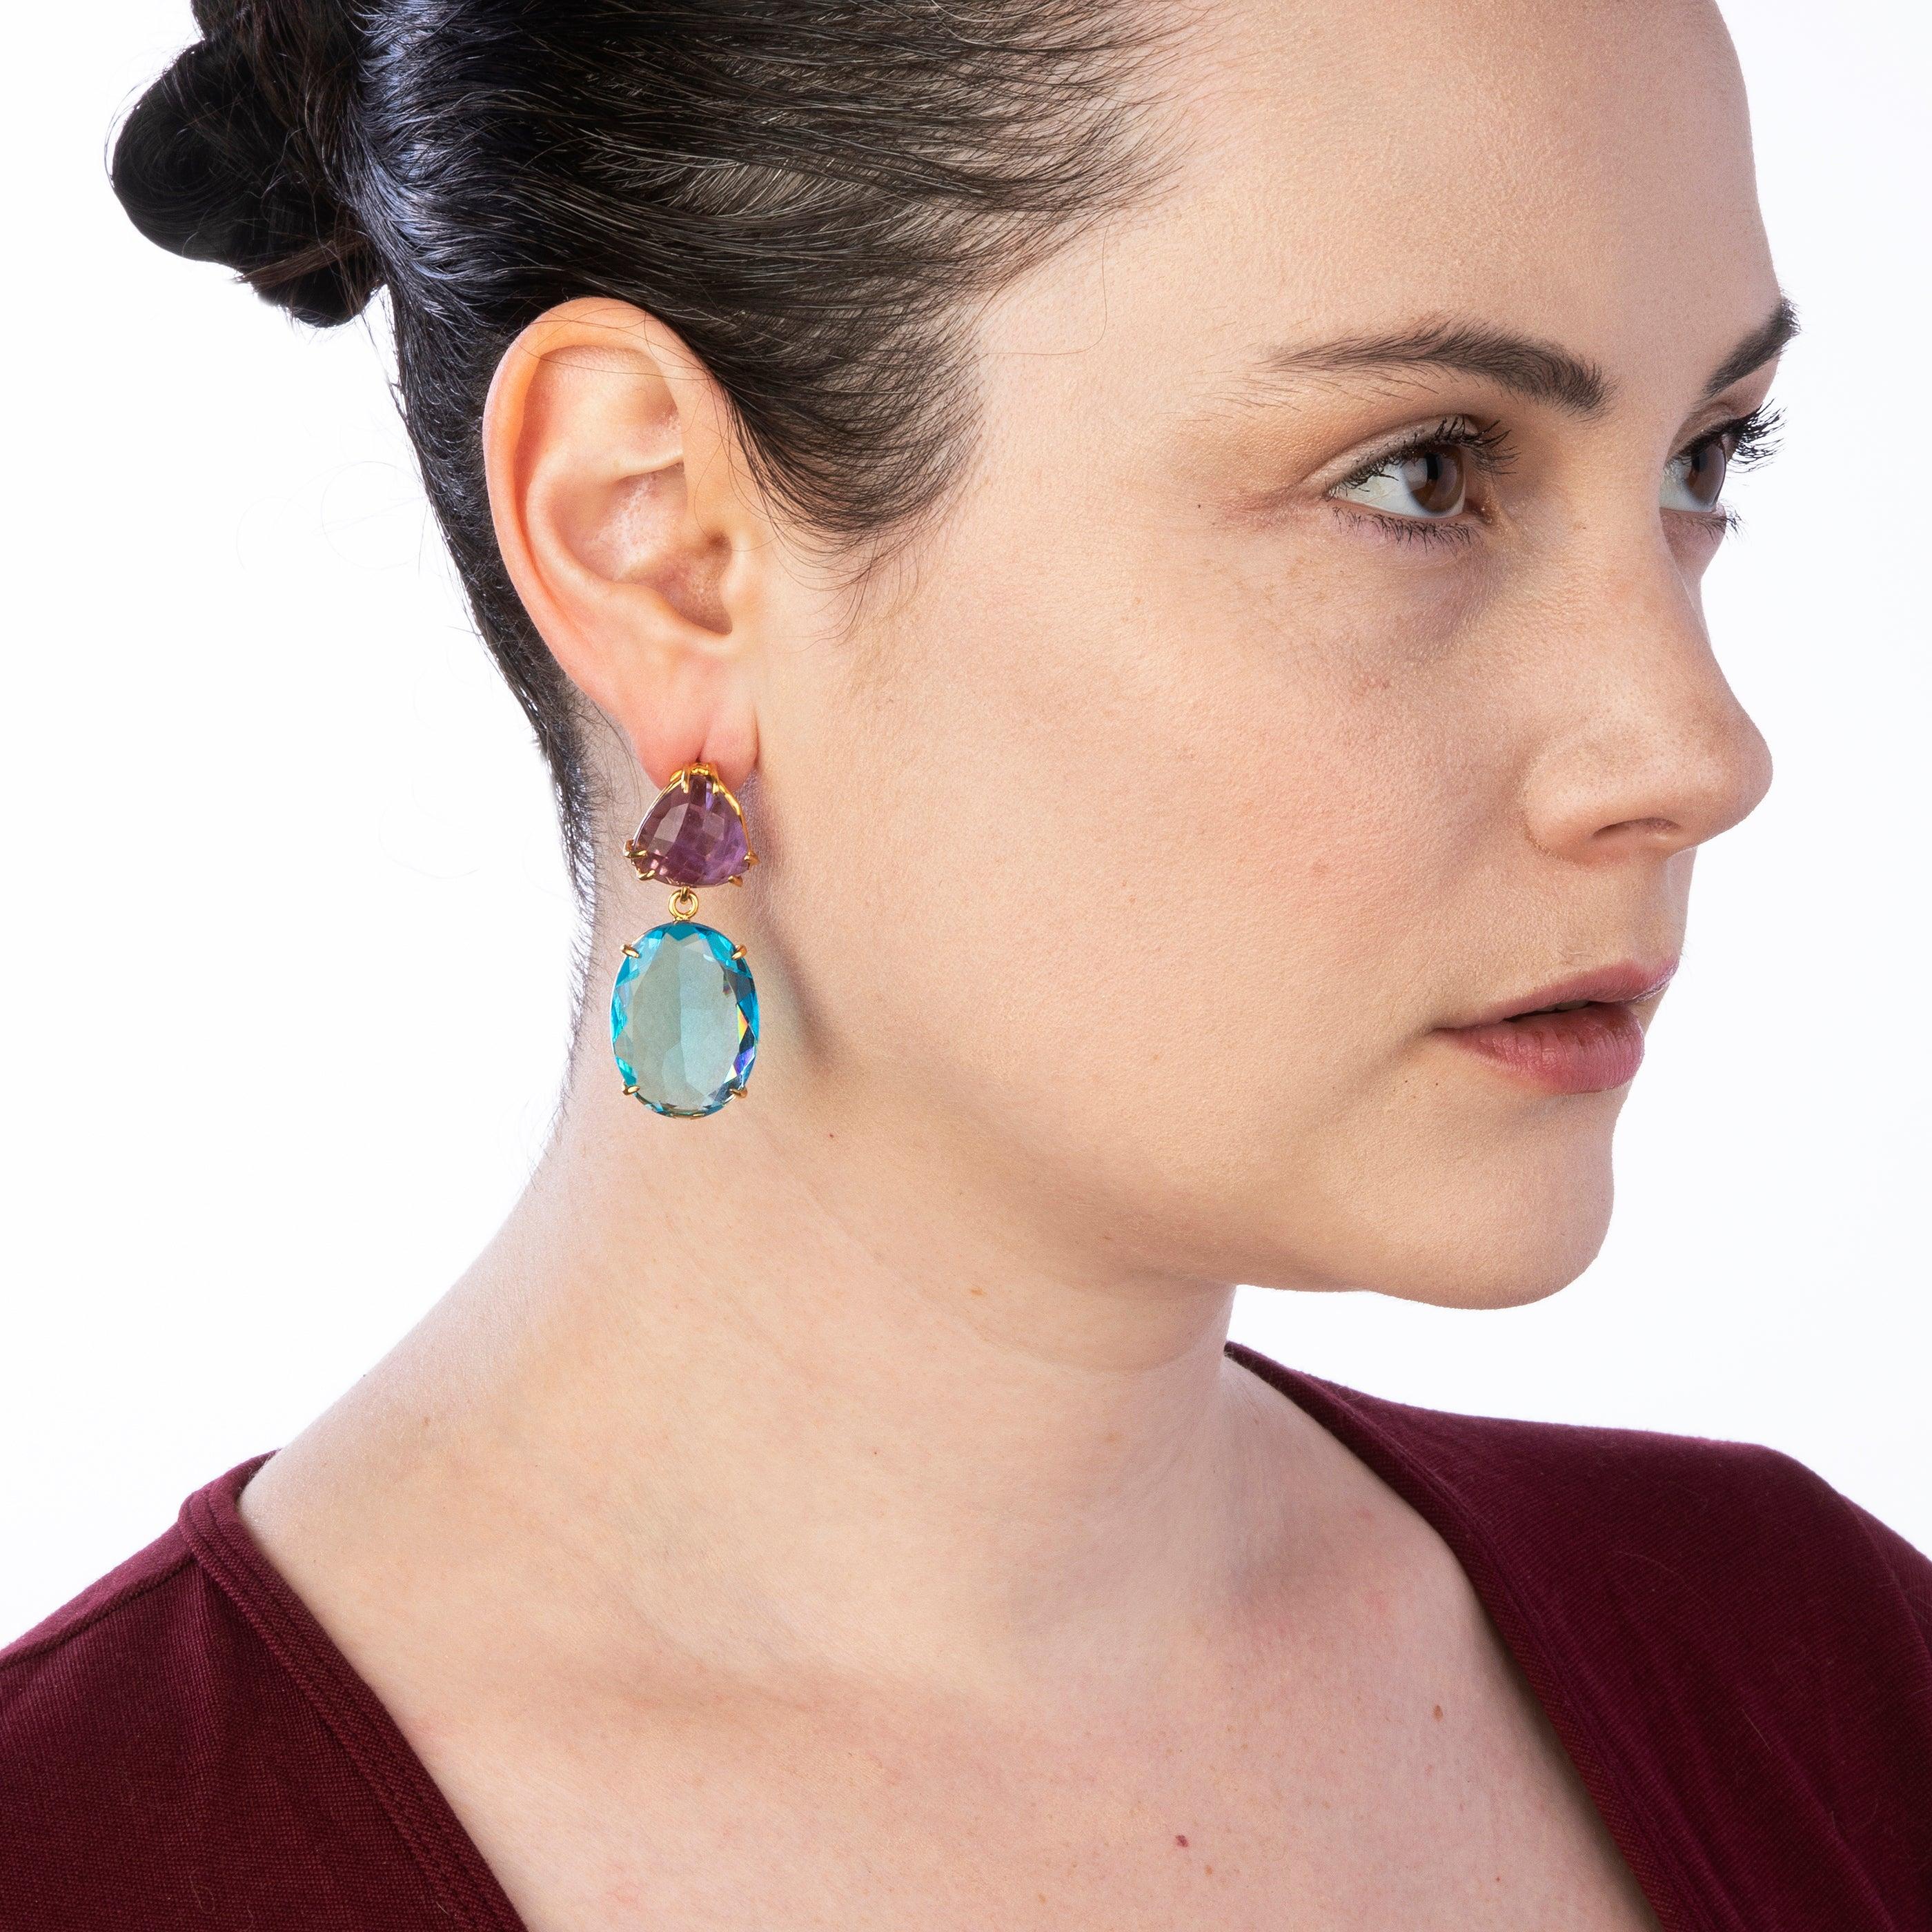 The Leyla Earrings, exude a captivating charm that's perfect for summer. Their vintage and retro style adds a touch of elegance to any ensemble. With a removable drop feature, these earrings offer versatility, allowing you to wear them as studs for